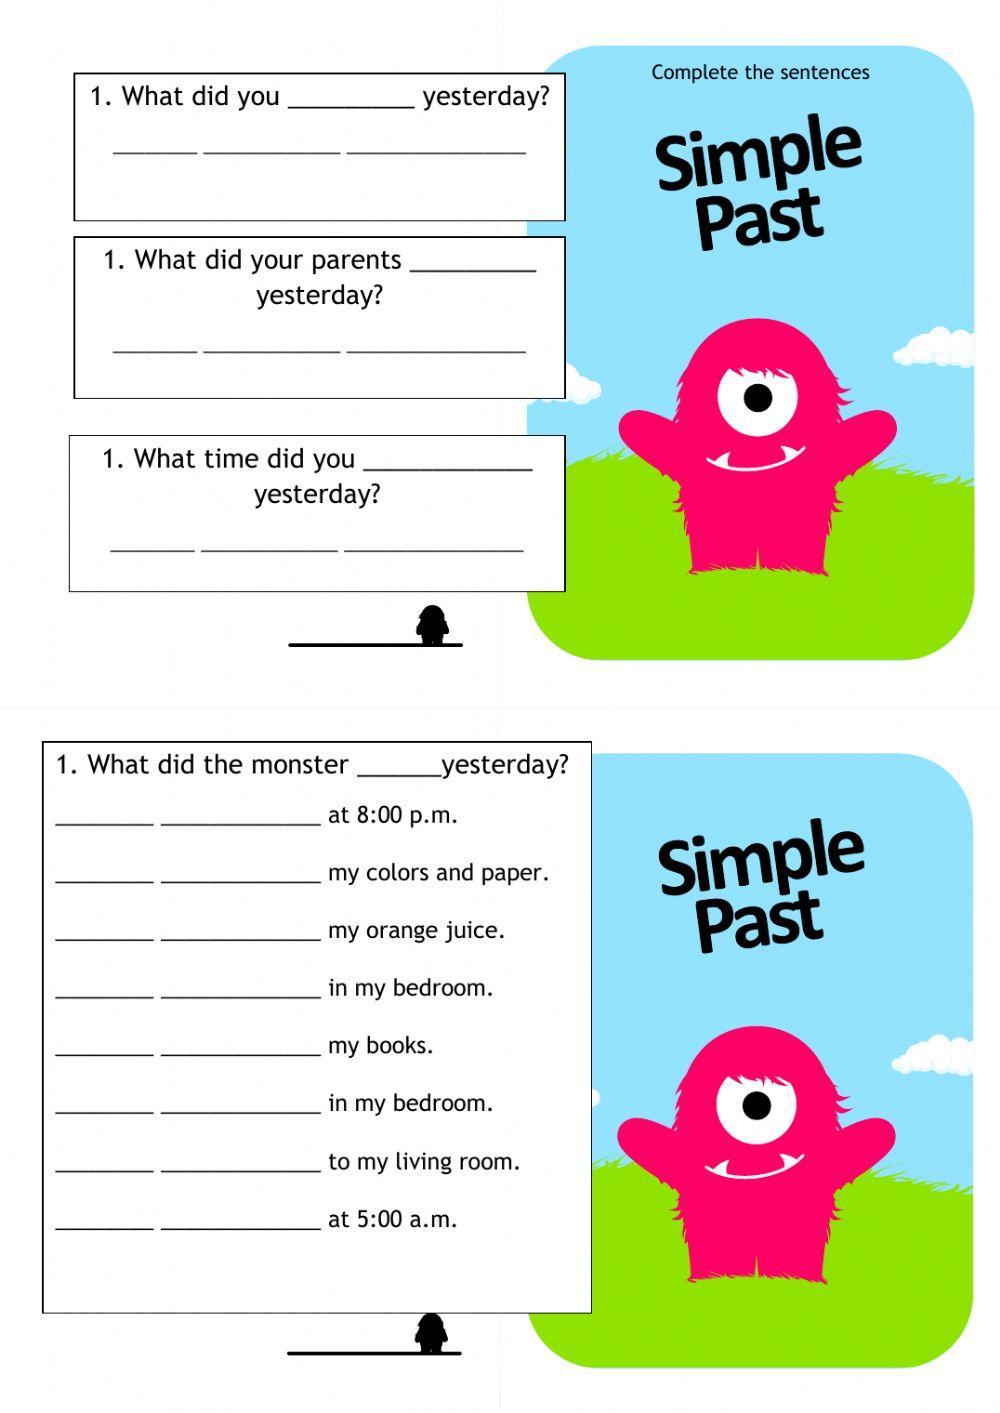 Simple past structure